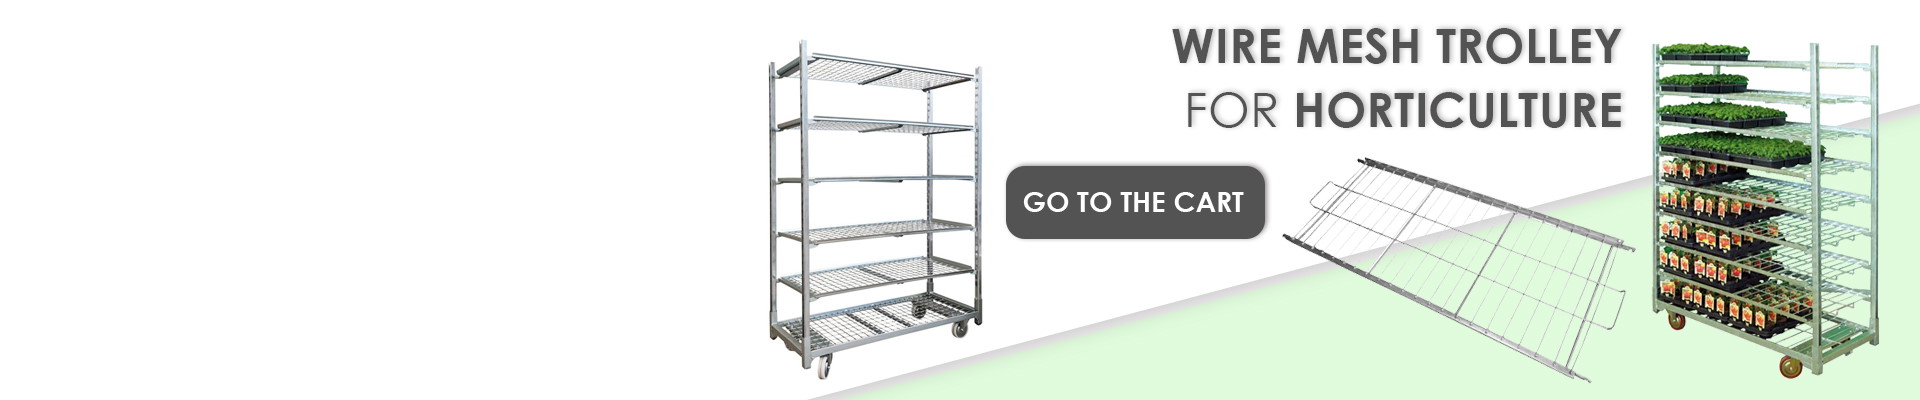 DISCOVER THE WIRE MESH TROLLEY FOR HORTICULTURE